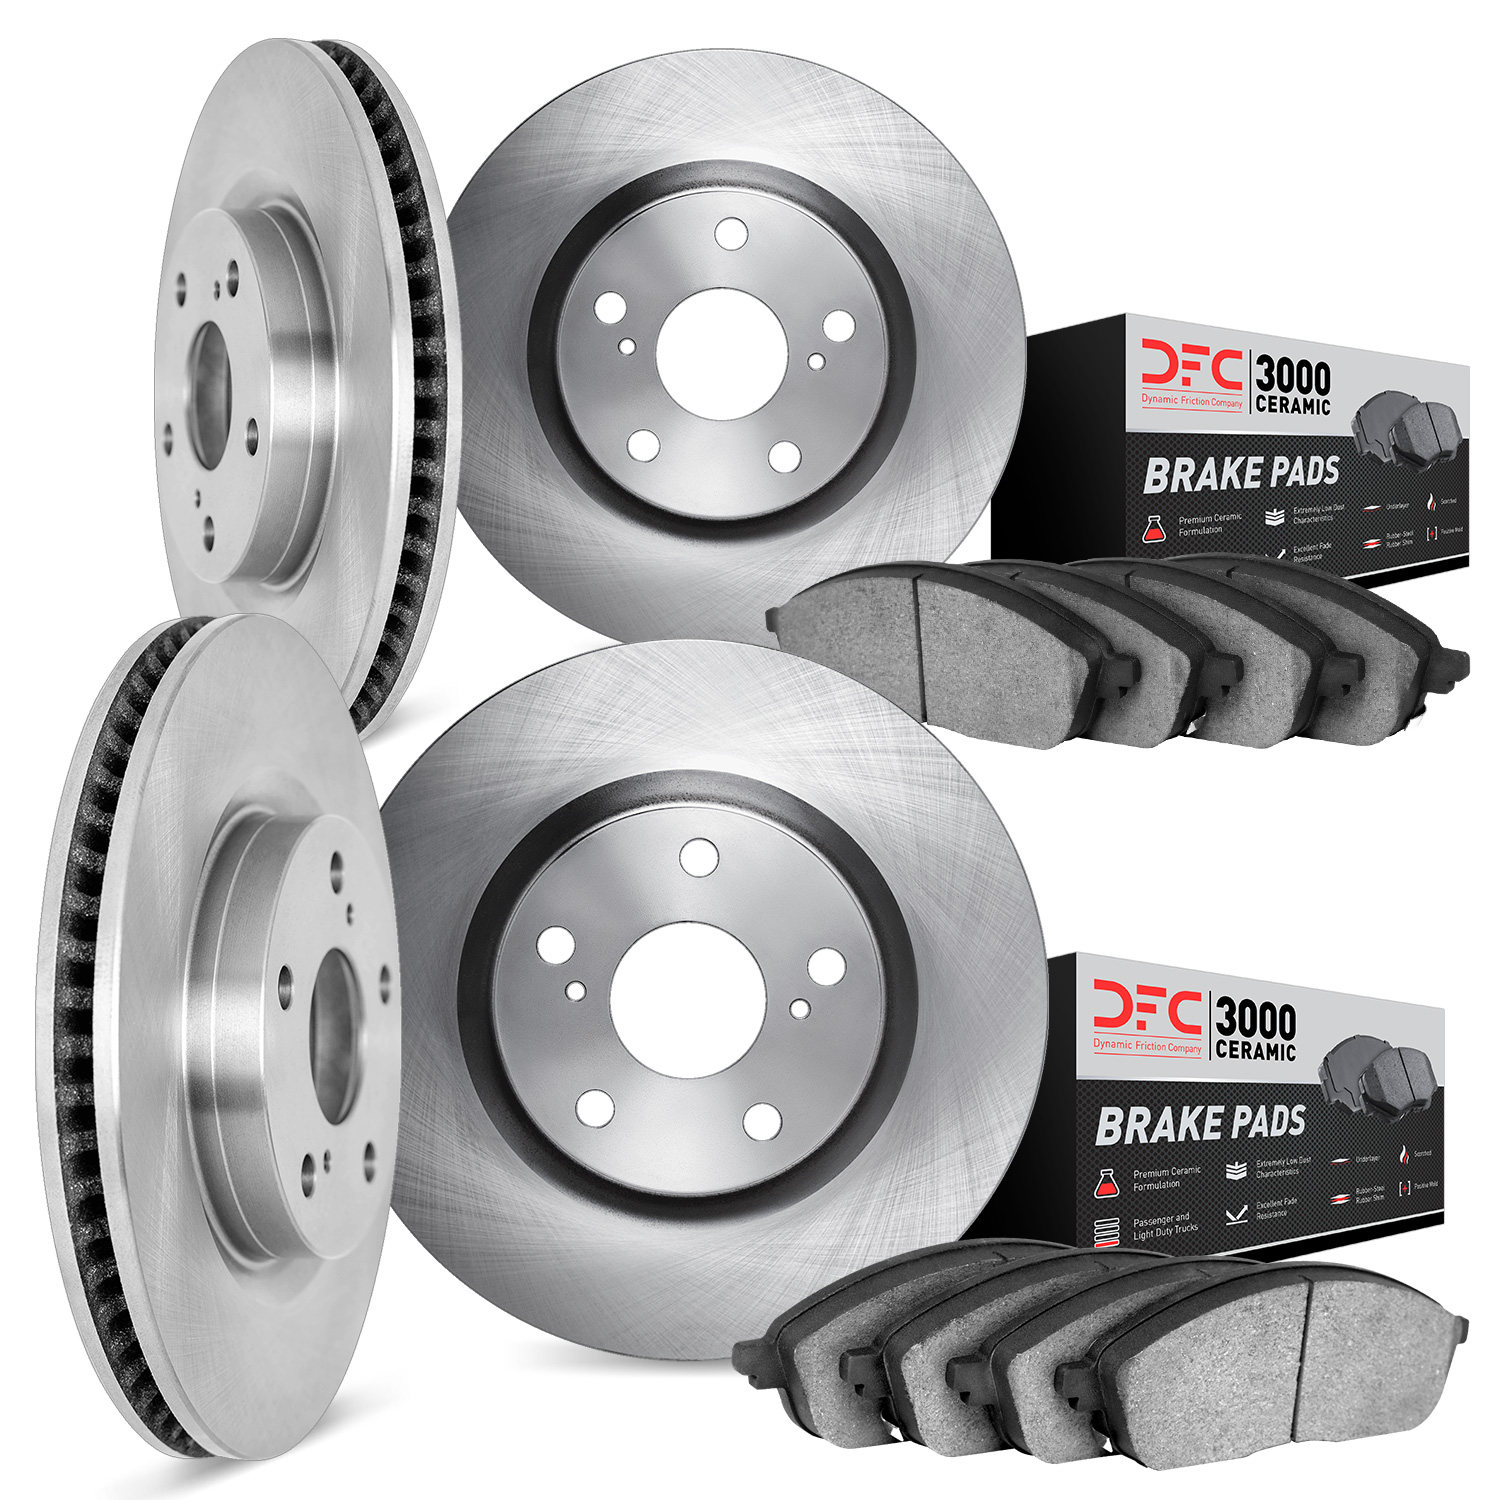 6304-31053 Brake Rotors with 3000-Series Ceramic Brake Pads Kit, 2007-2015 BMW, Position: Front and Rear